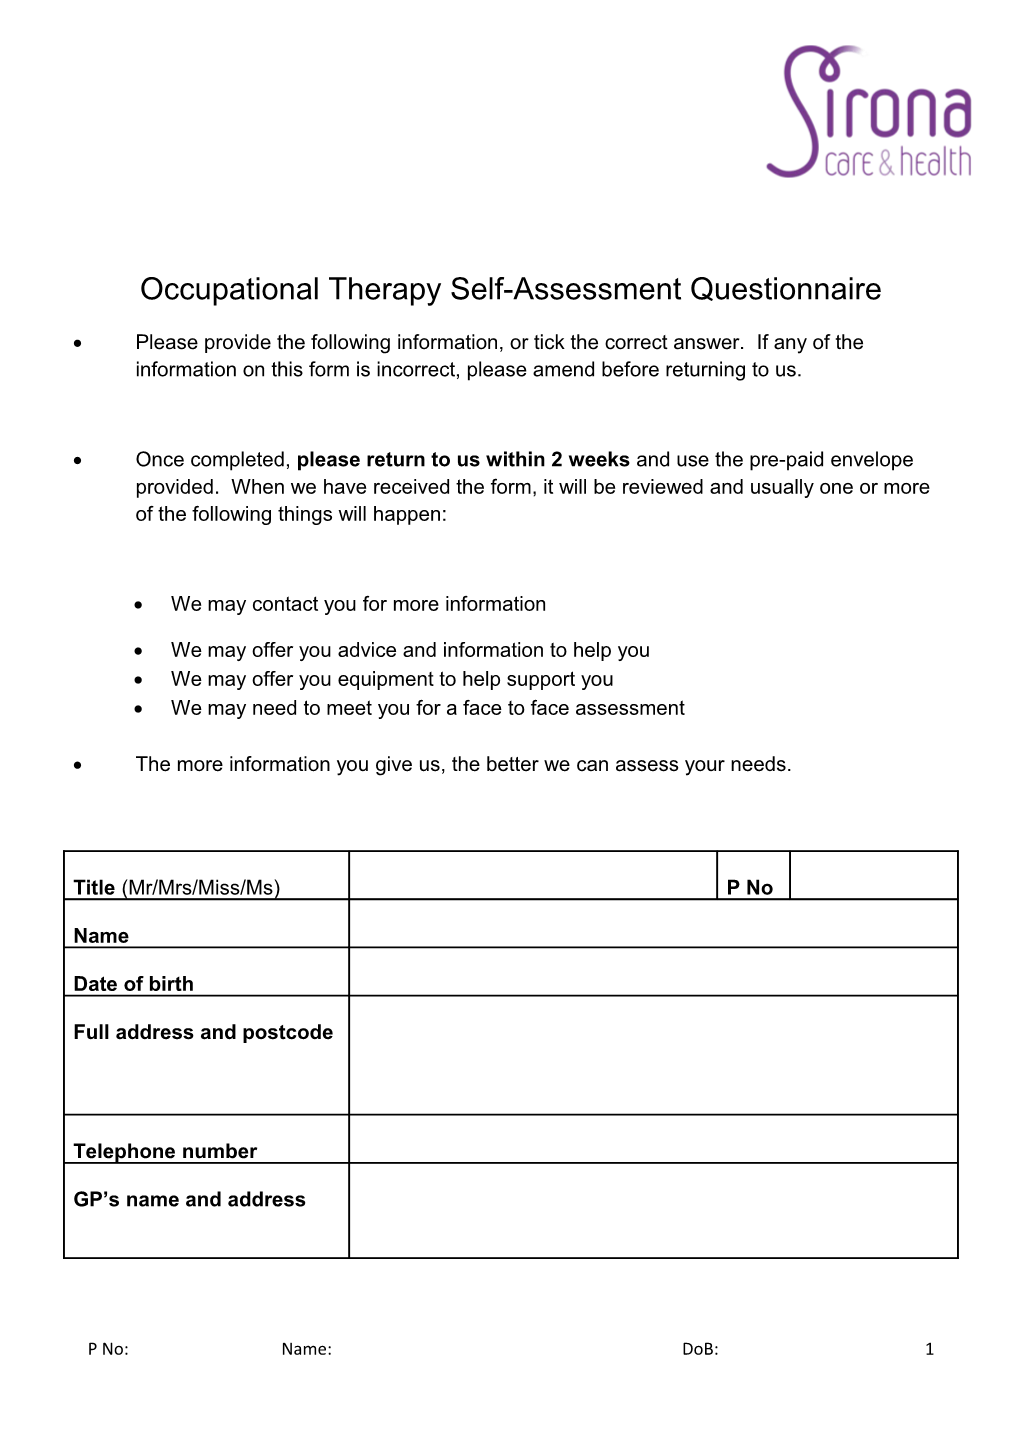 Occupational Therapy Self-Assessment Questionnaire